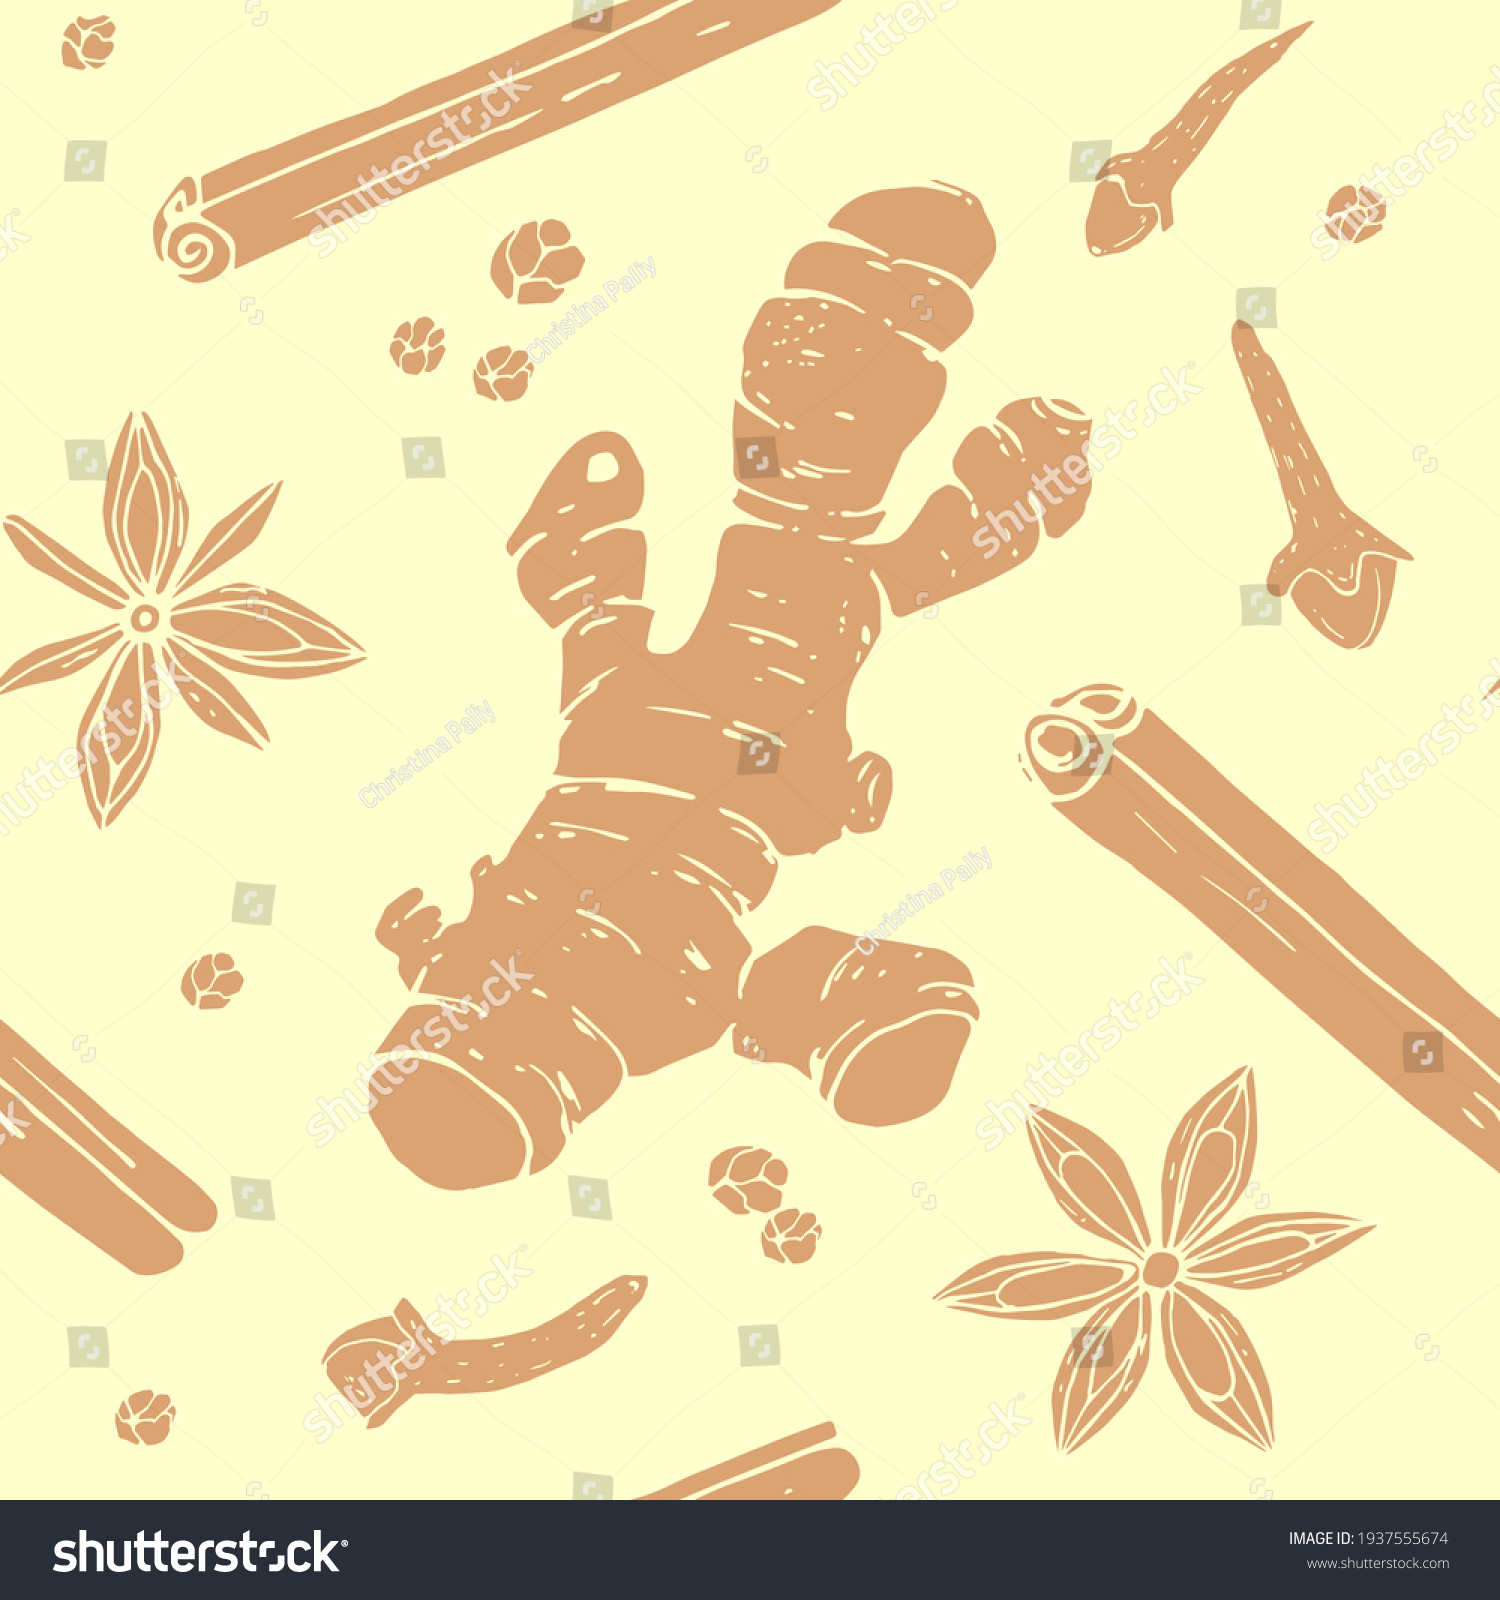 Vector graphics seamless pattern in contour style. Fragrant spices ginger root, cinnamon sticks, cloves, star anise and peppercorns illustration hand-drawn on a yellow background. #1937555674